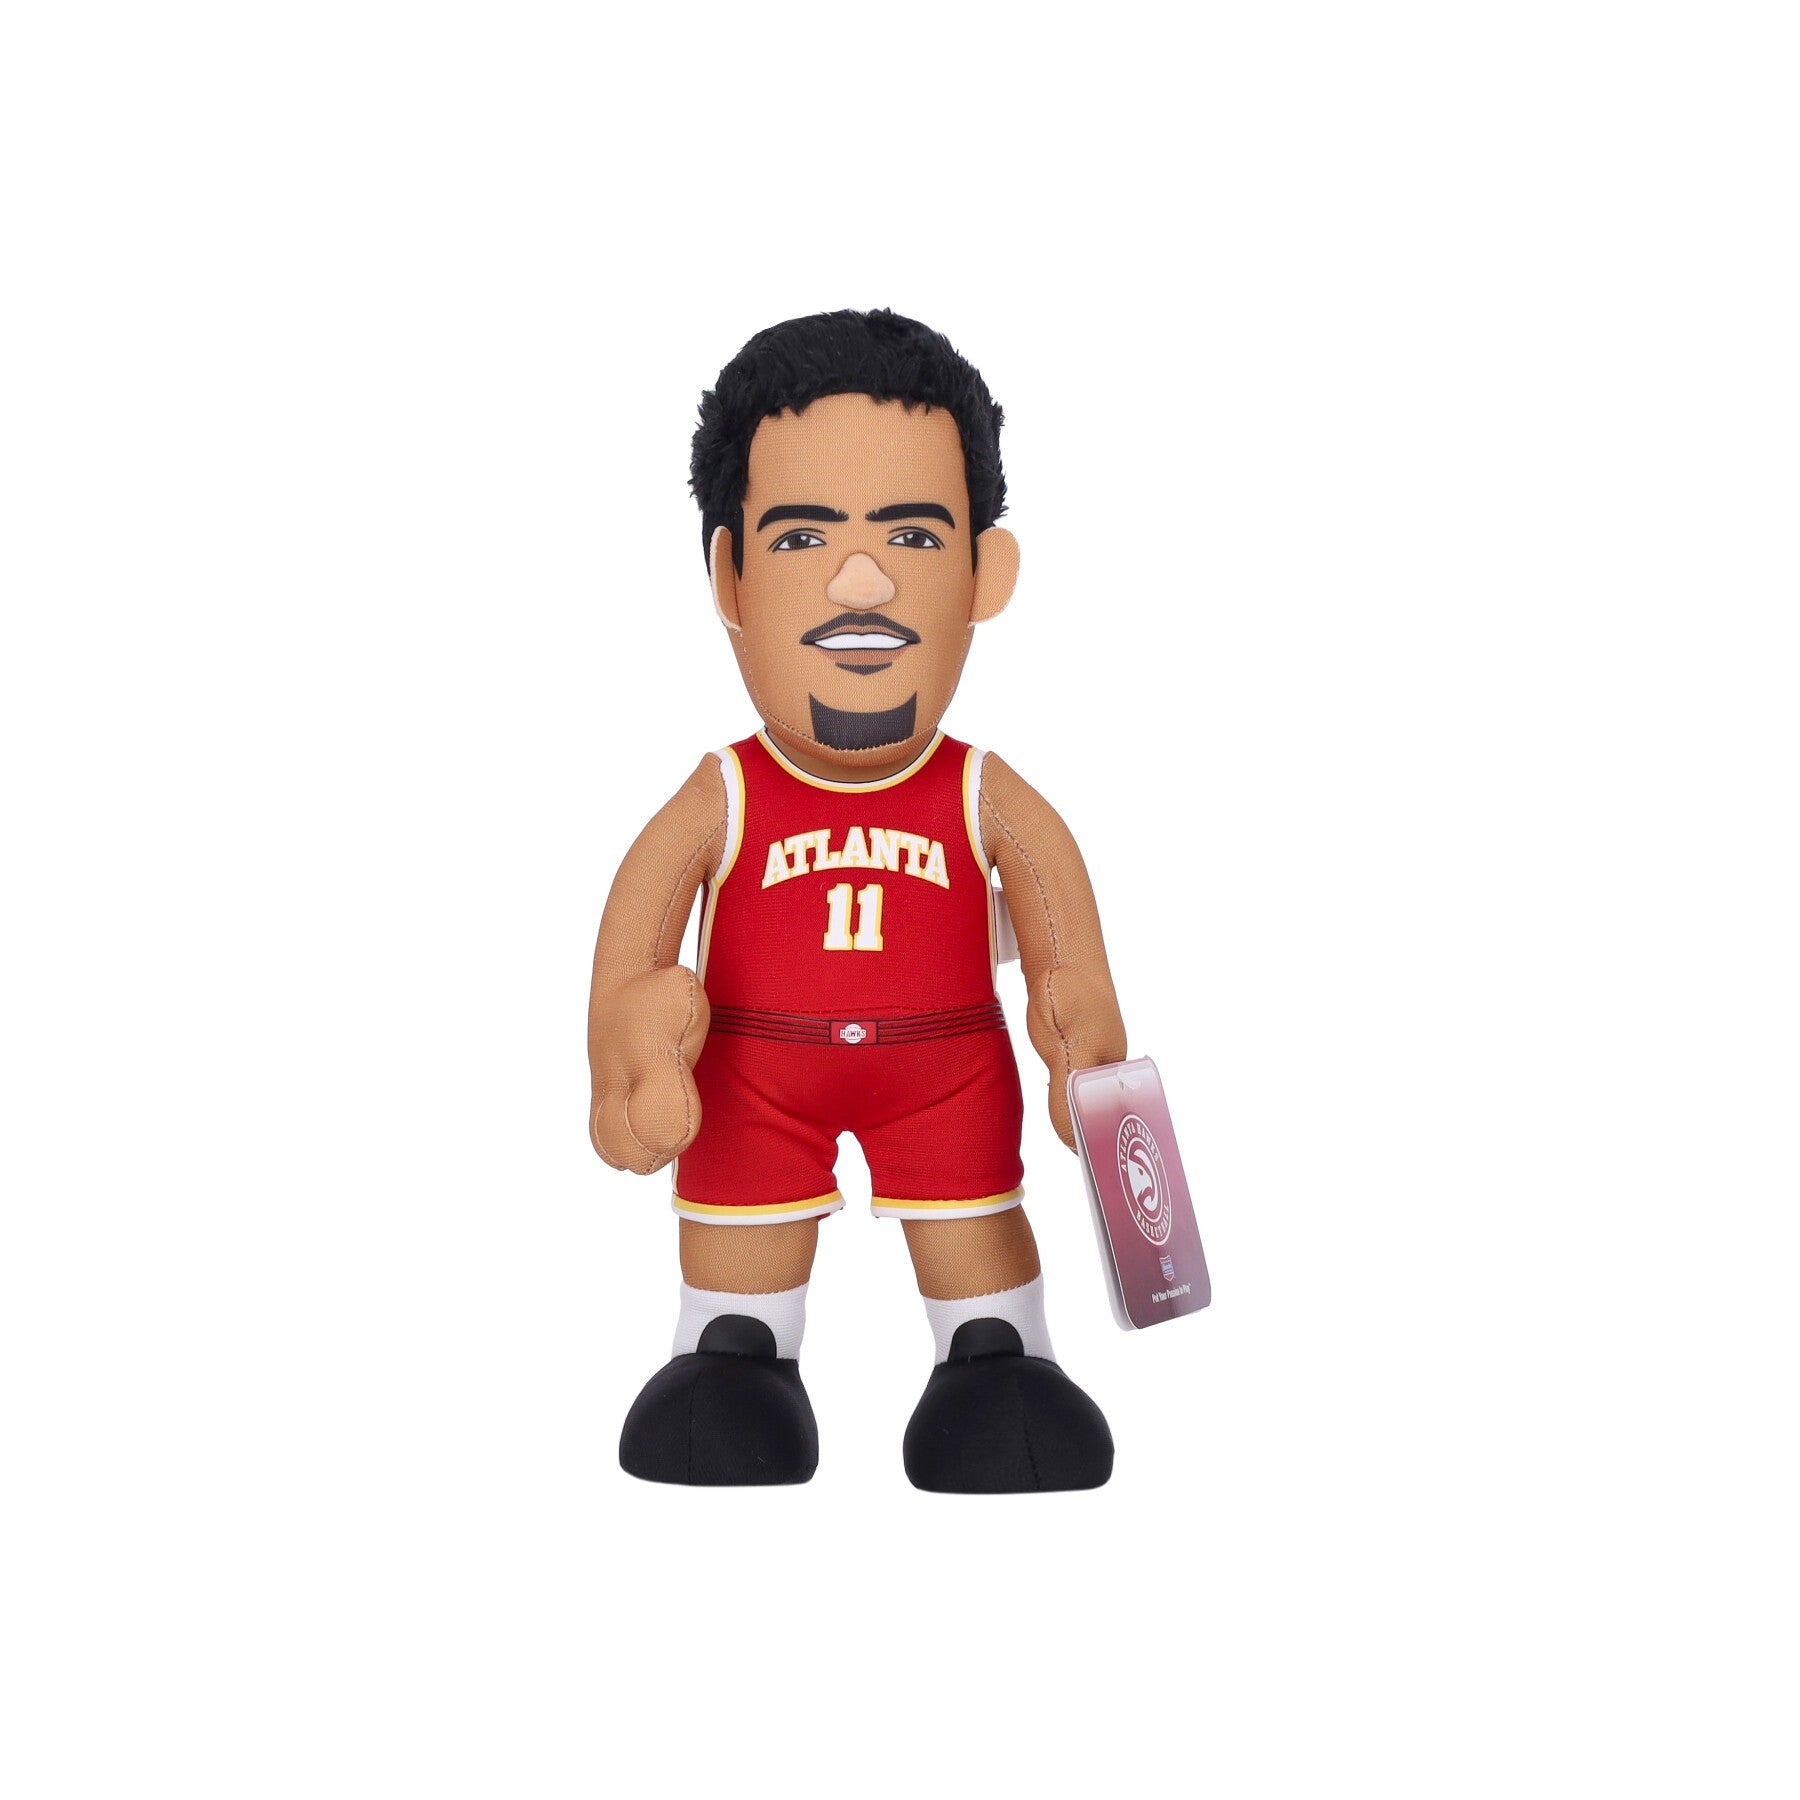 Bleacher Creatures, Pupazzetto Uomo Nba Plush No 11 Trae Young Atlhaw, 